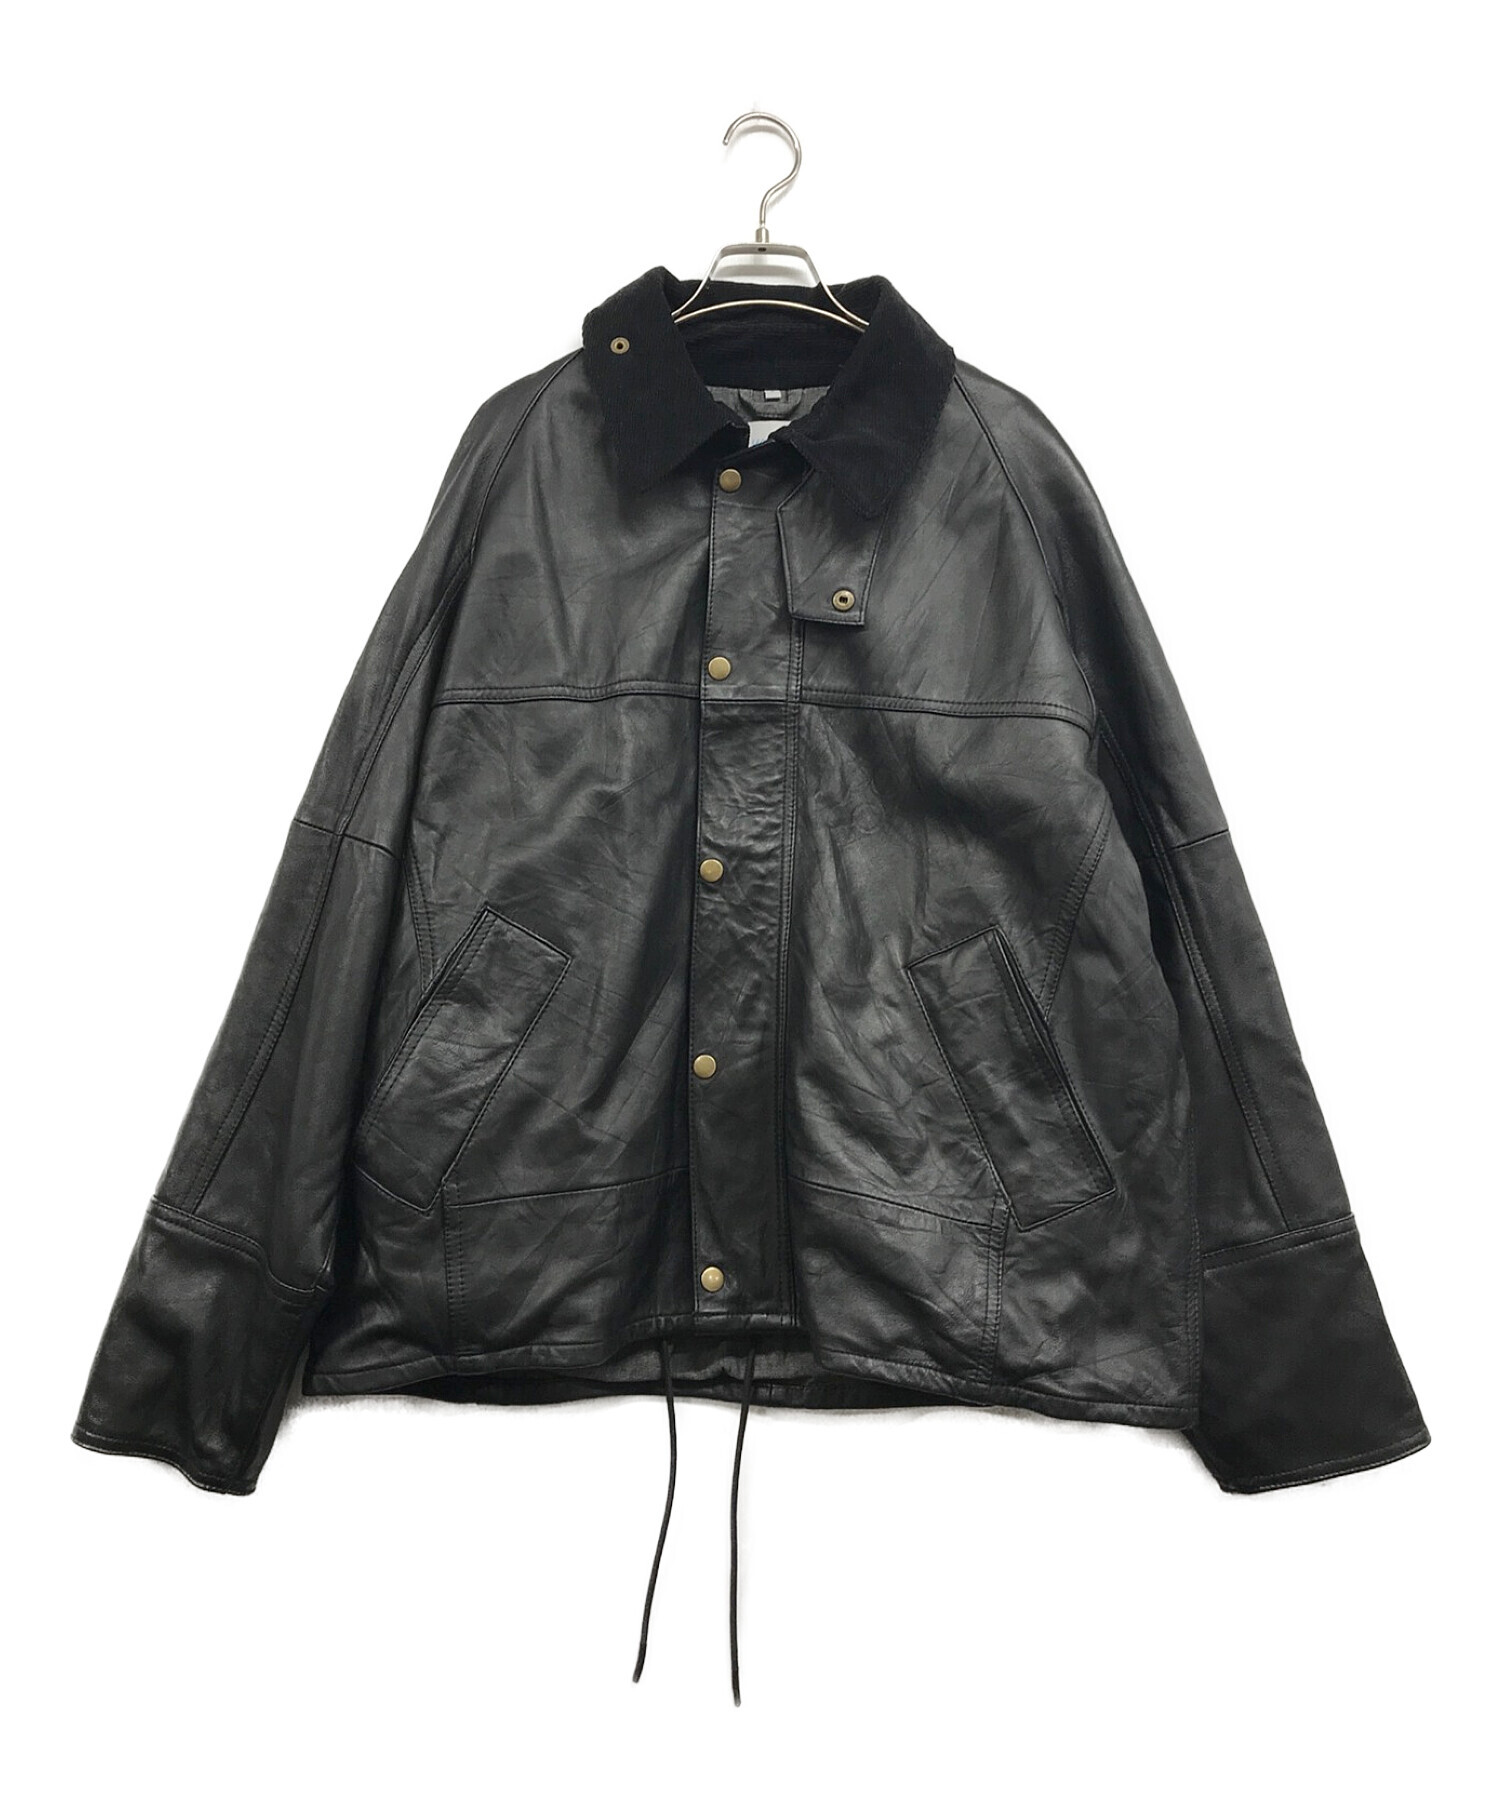 Yoused/Leather Drivers Jacket 新品未使用サイズ1バブアー